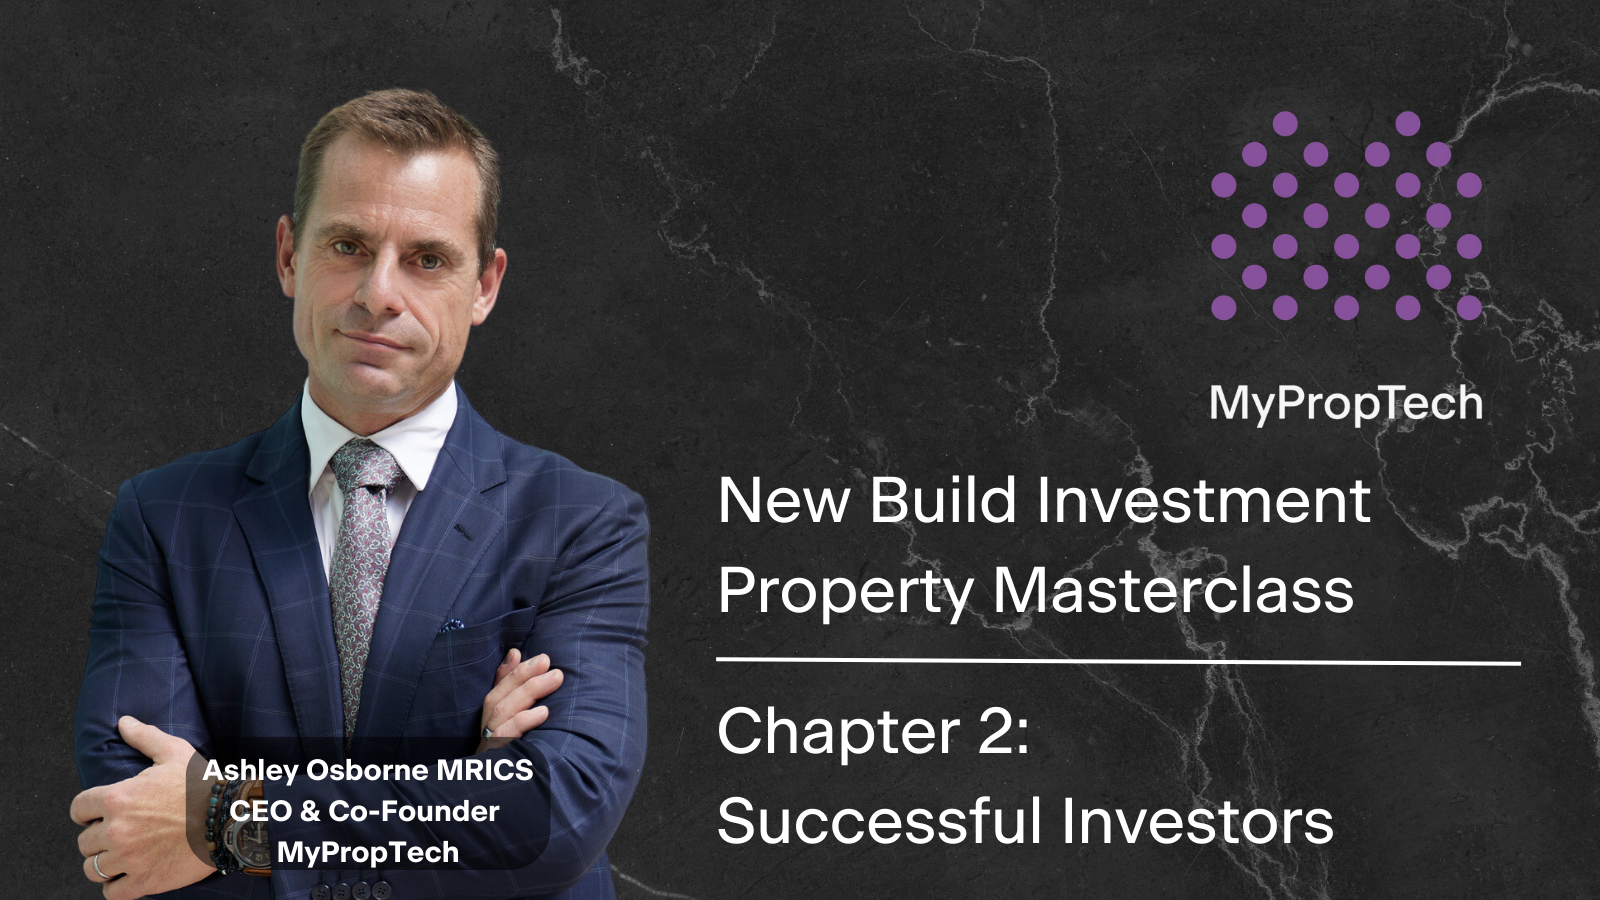 New Build Investment Property Masterclass - Chapter 2